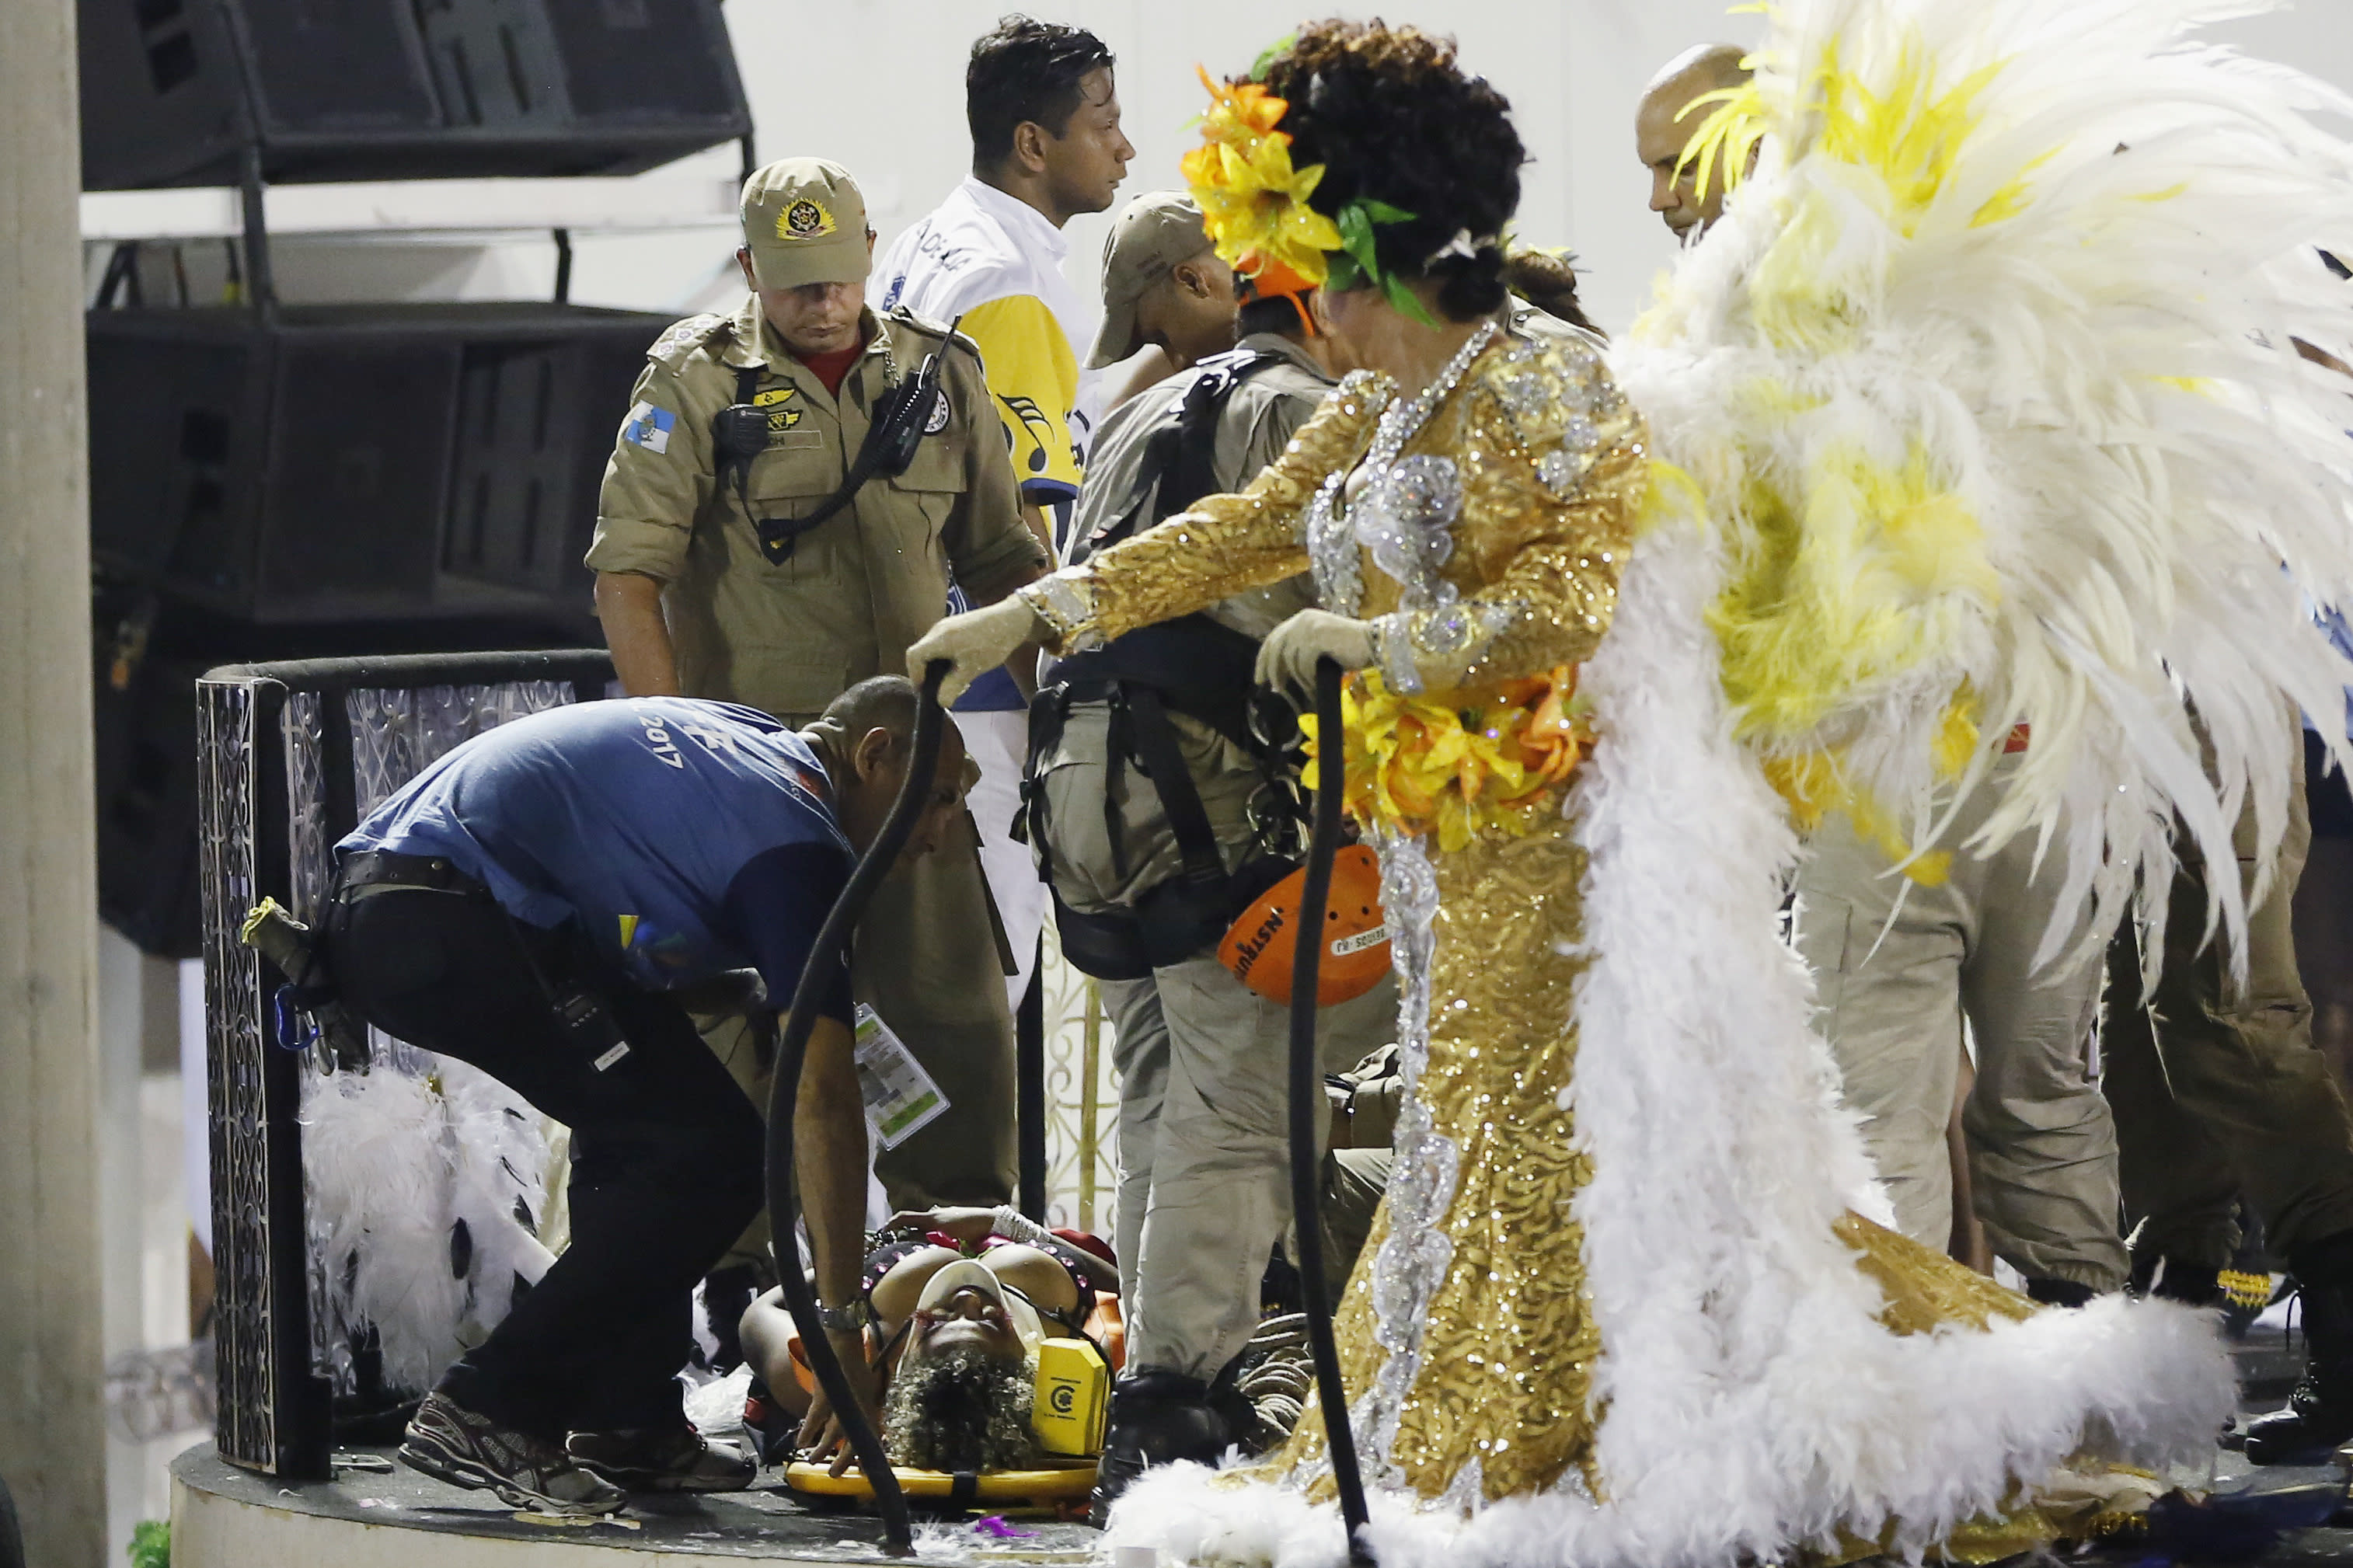 Part of Rio Carnival float collapses, injuring 12